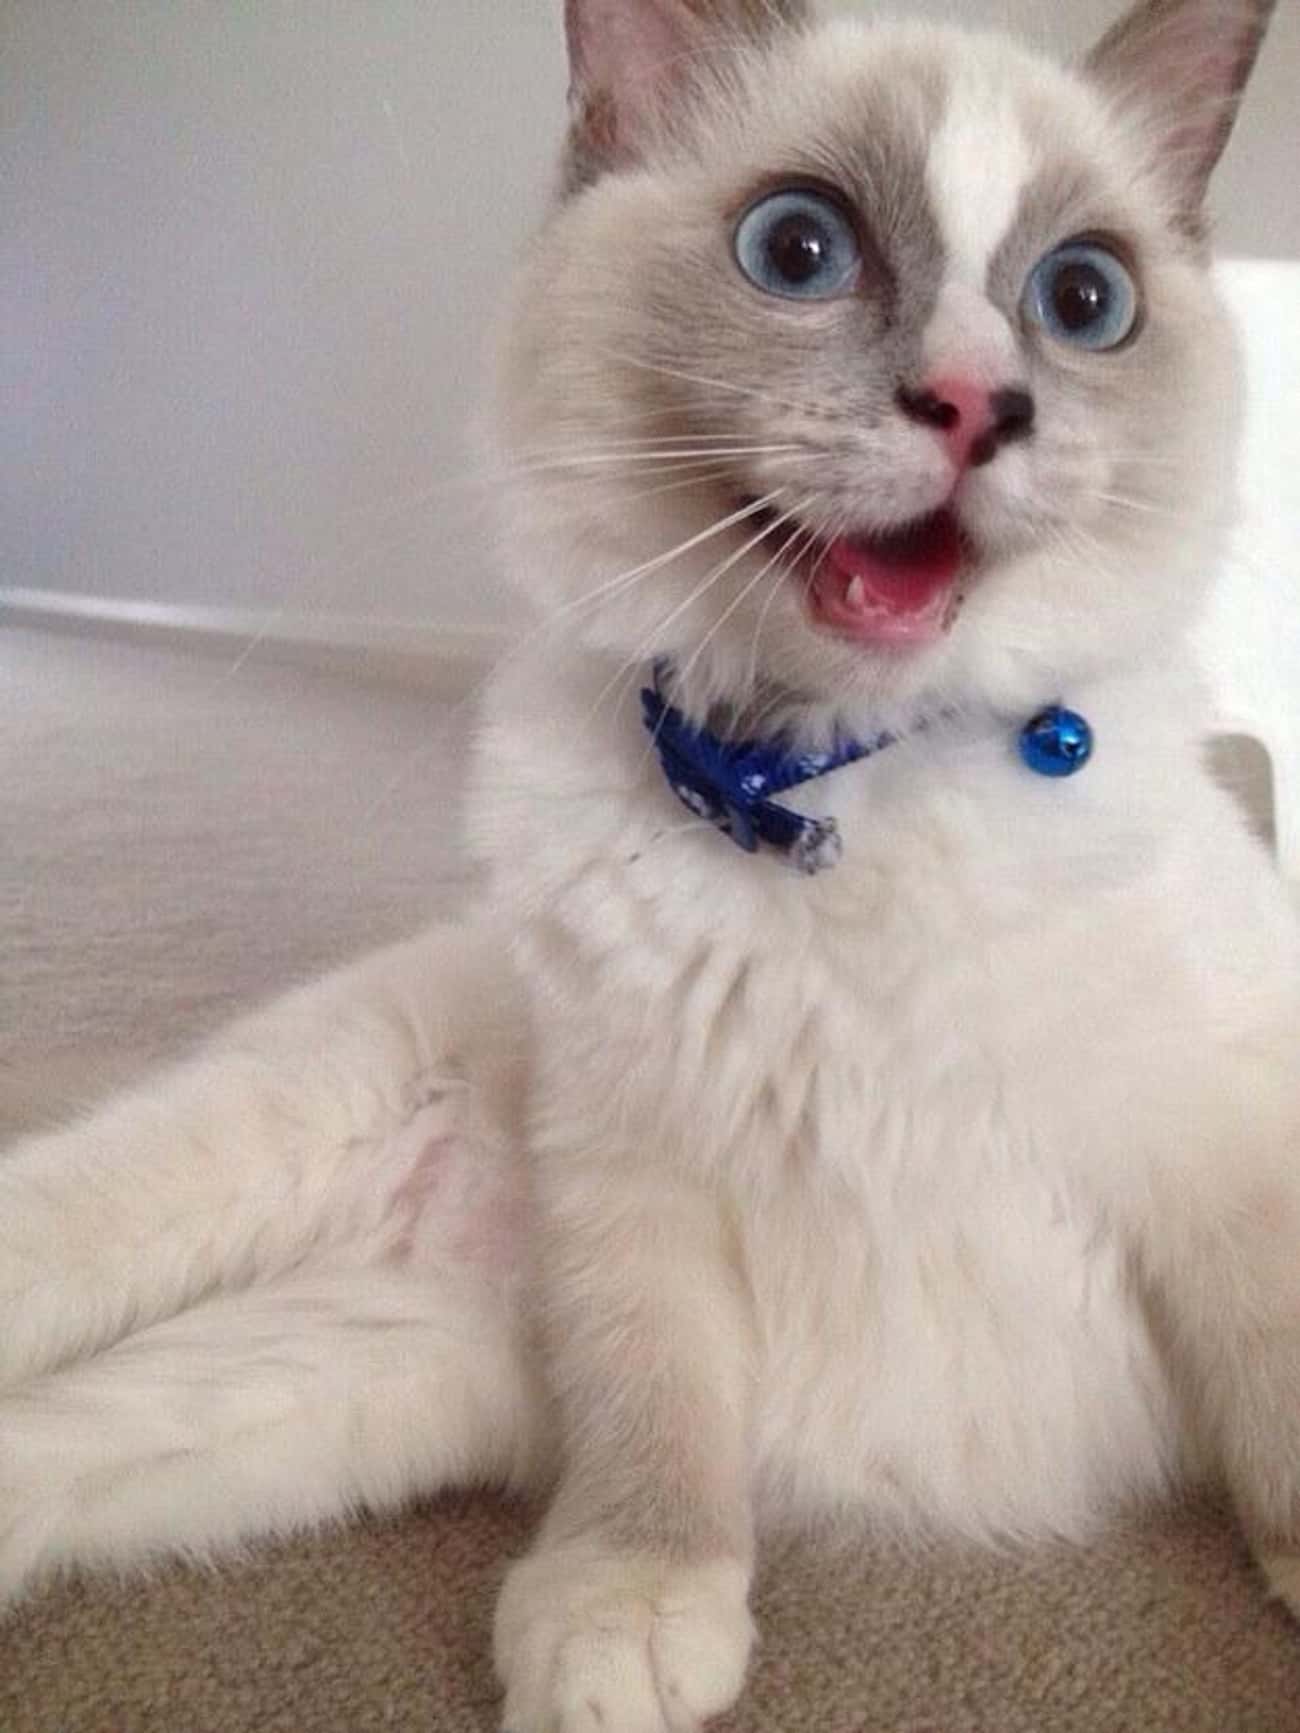 This Enthusiastic Kitty Cat